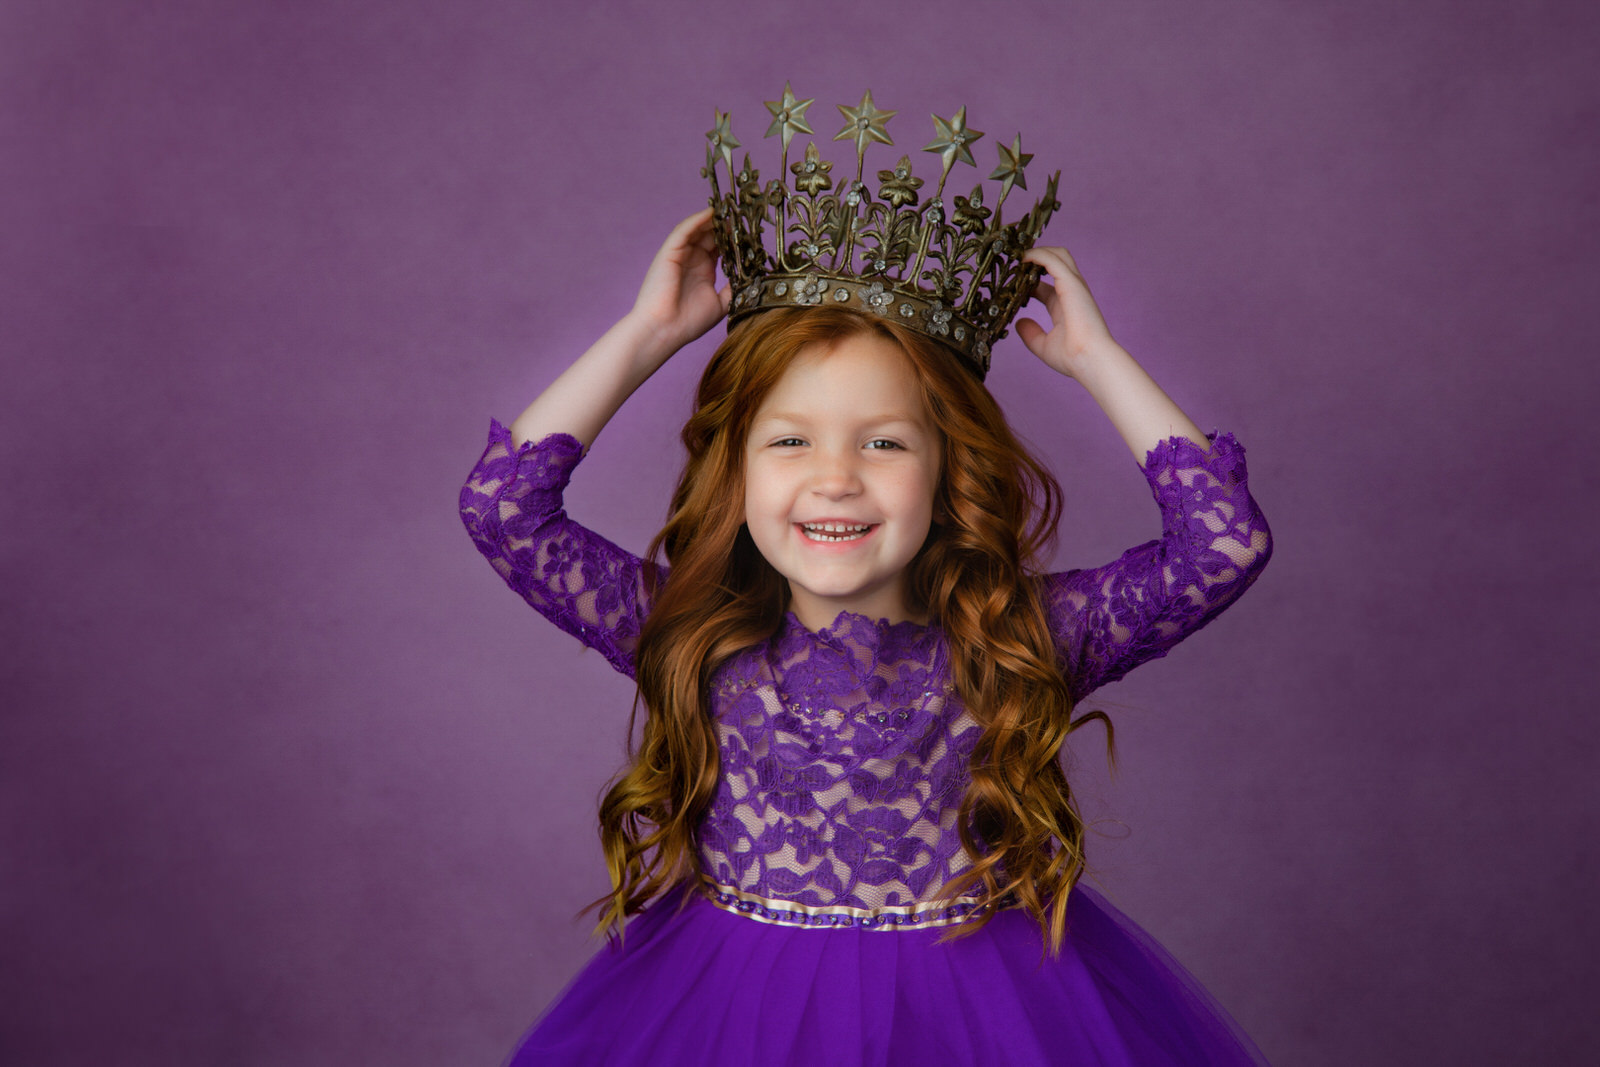 A young girl in a purple dress holds a large crown above her head in a studio DFW Kids fine art princess photography